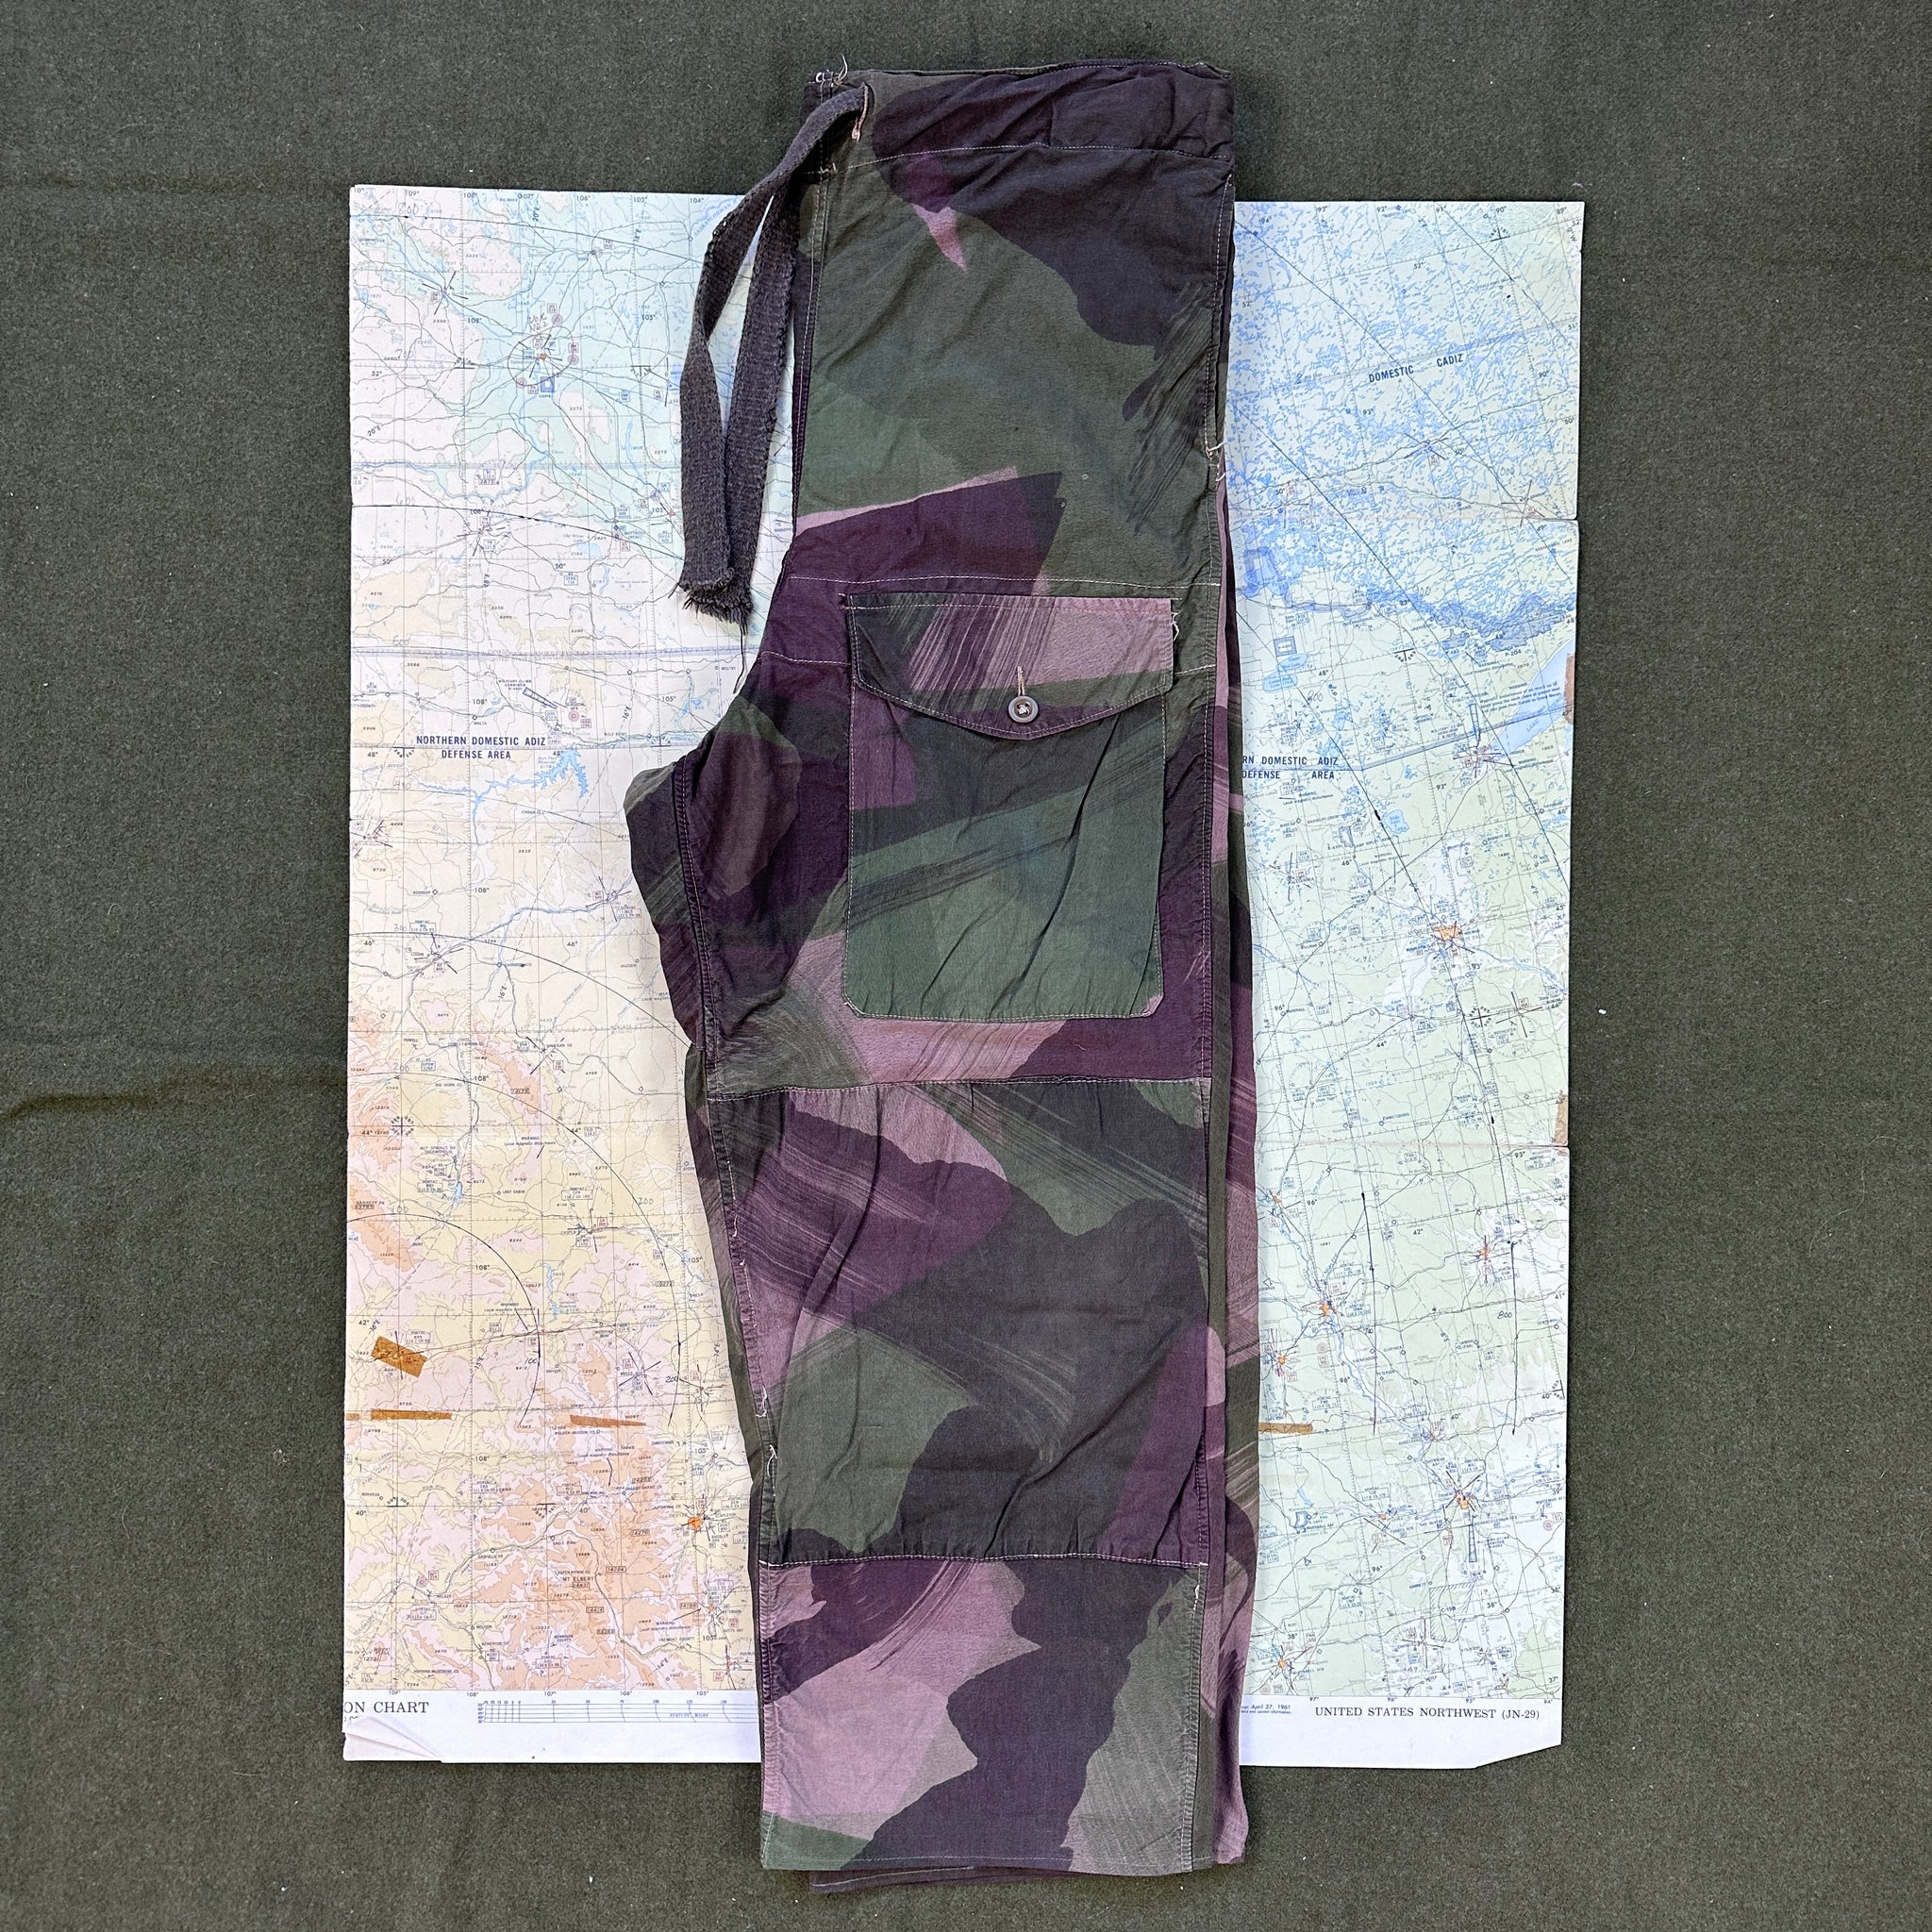 British Army WW2 Windproof Camo Trousers – The Major's Tailor